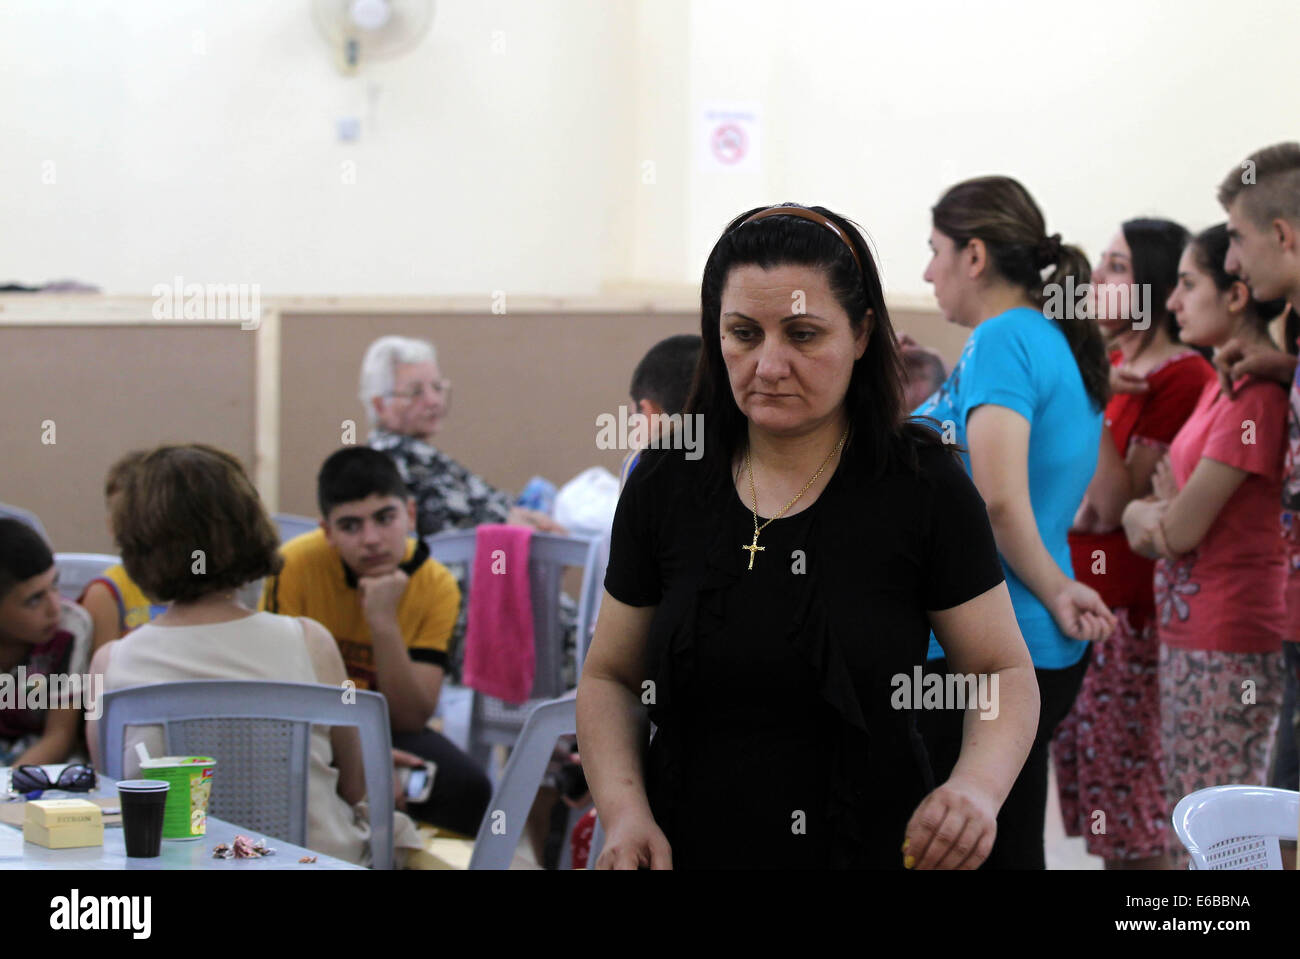 (140819)-- AMMAN, Aug. 19, 2014 (Xinhua)-- Iraqi Christian refugees, who fled the violence to Jordan, stay at Dar Al Salam Association in Amman, Jordan on Aug. 19, 2014. Iraqi Christian families sought sanctuary in Jordan after fleeing towns and villages to escape the advance of Islamic State militants. (Xinhua/Mohammad Abu Ghosh) Stock Photo